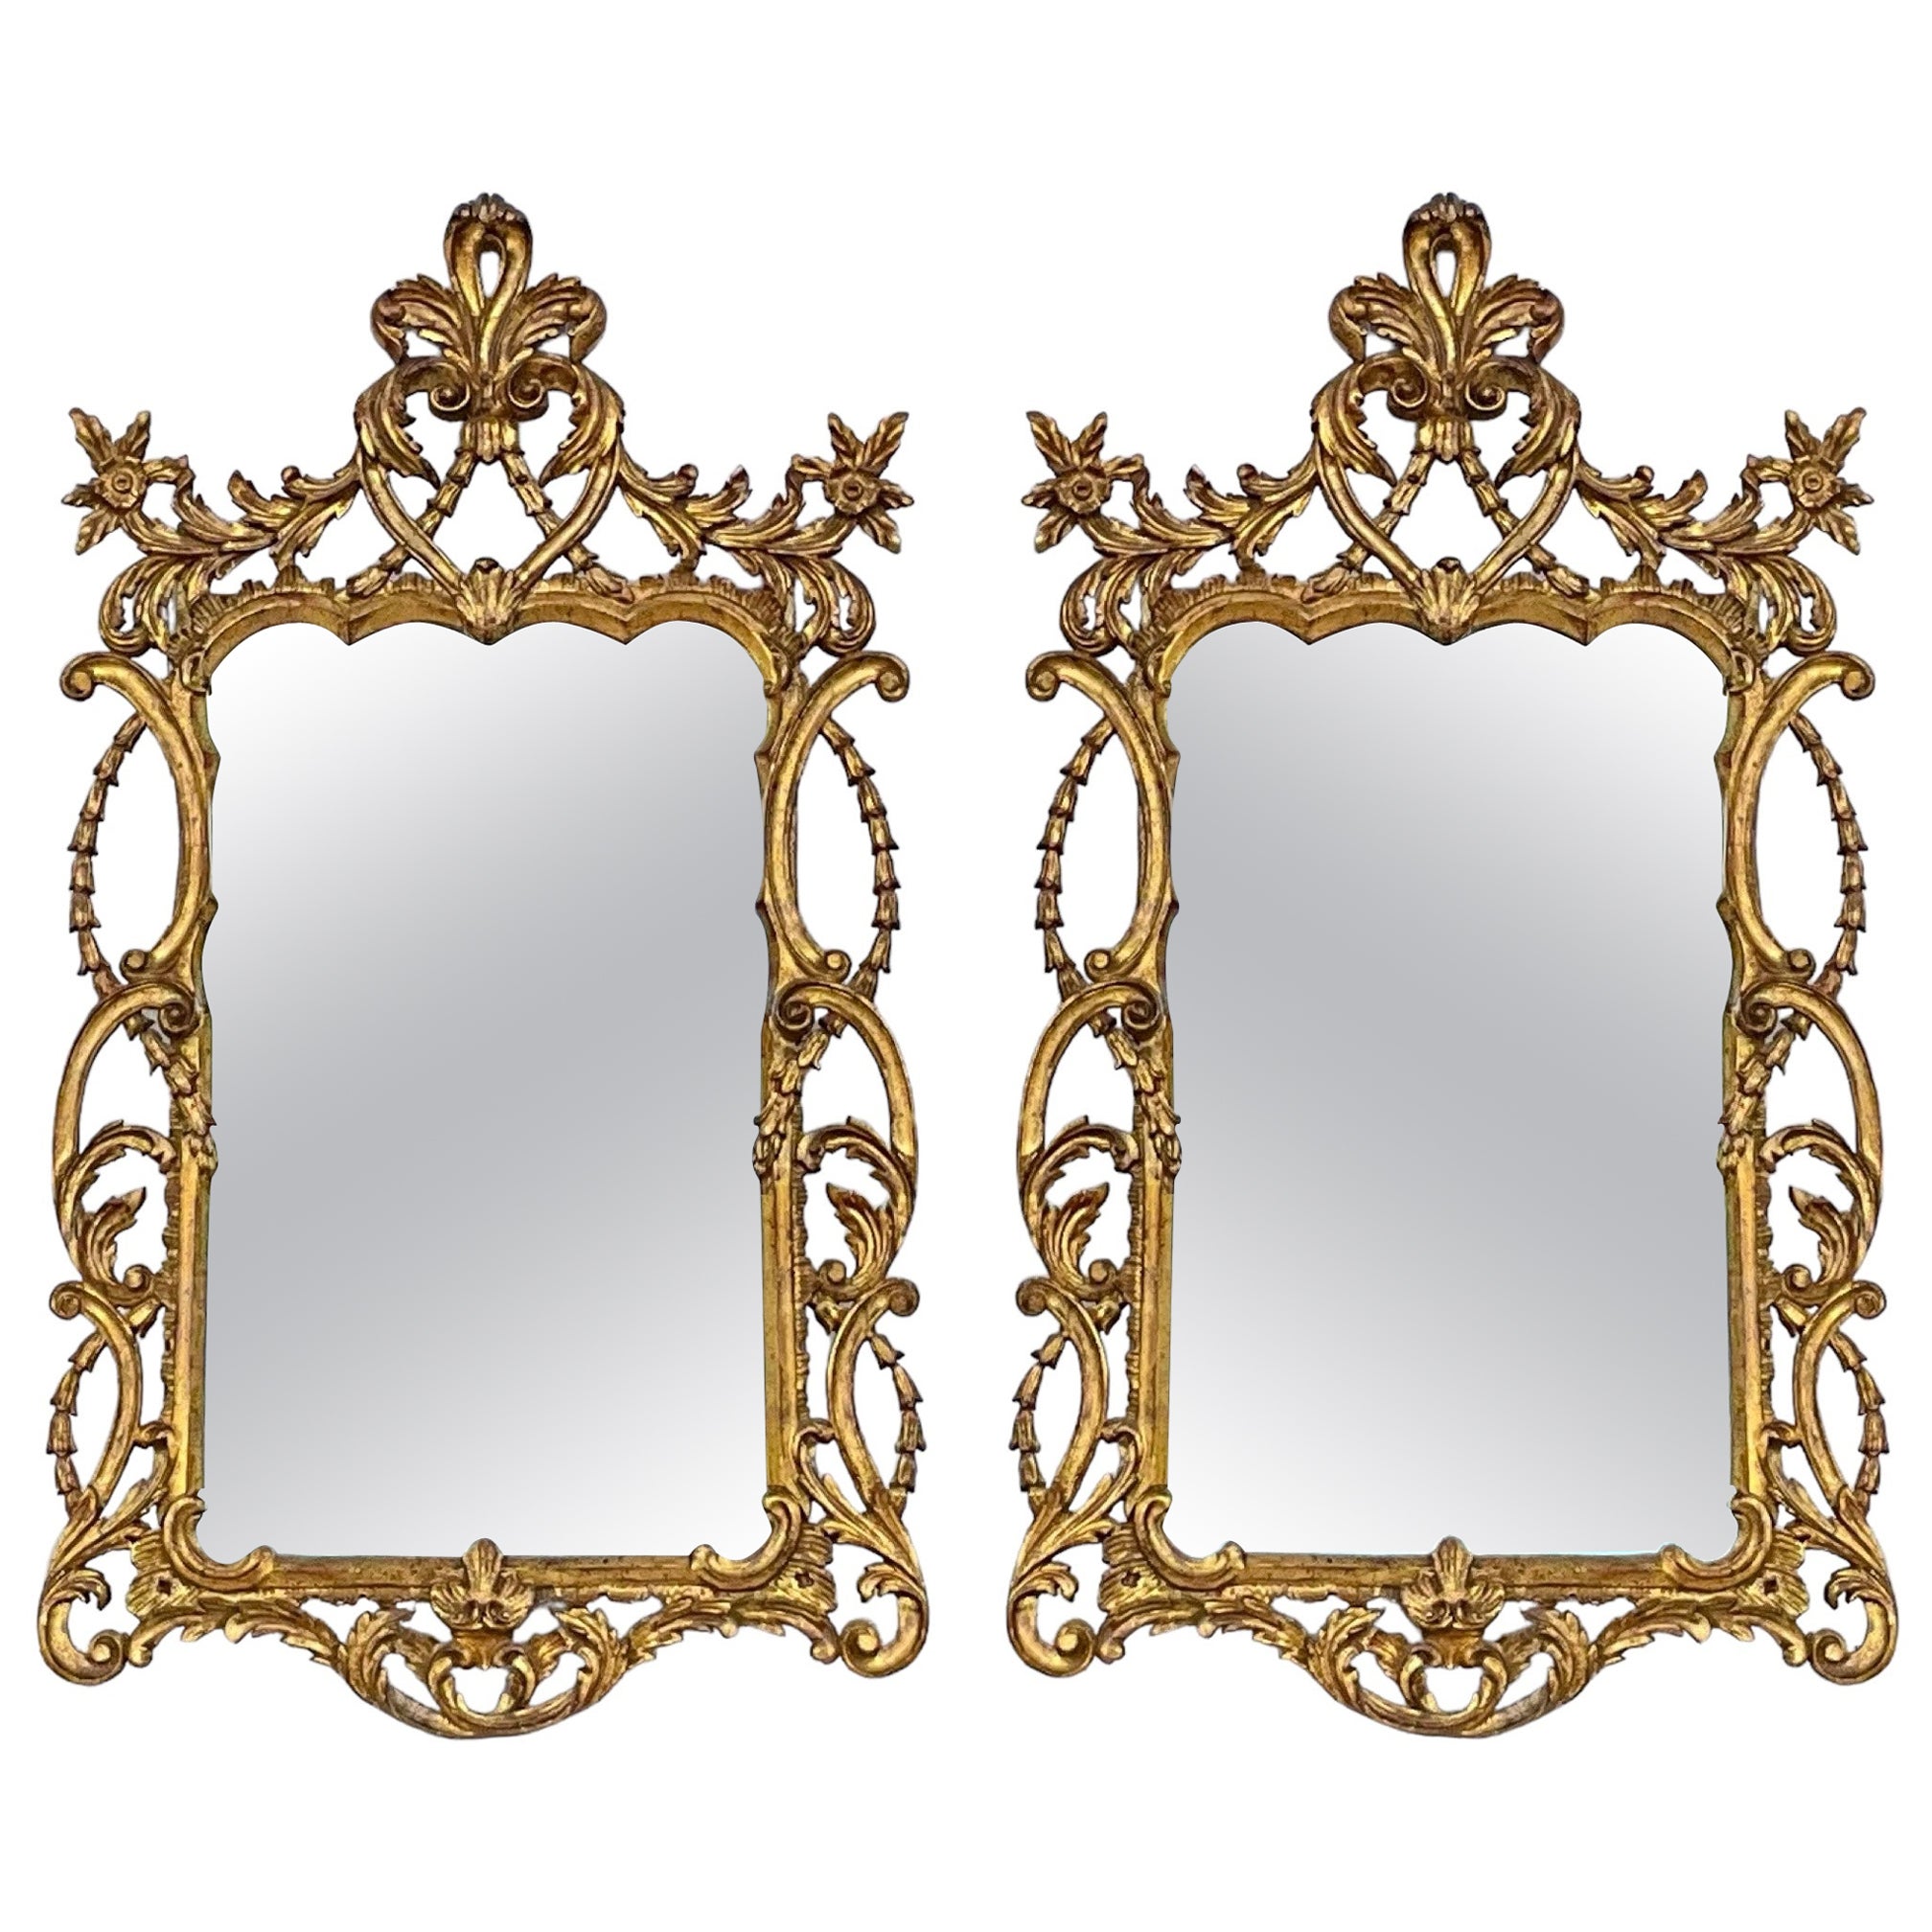 Mid-Century Italian Carved Giltwood Mirrors With French Styling -Pair For Sale